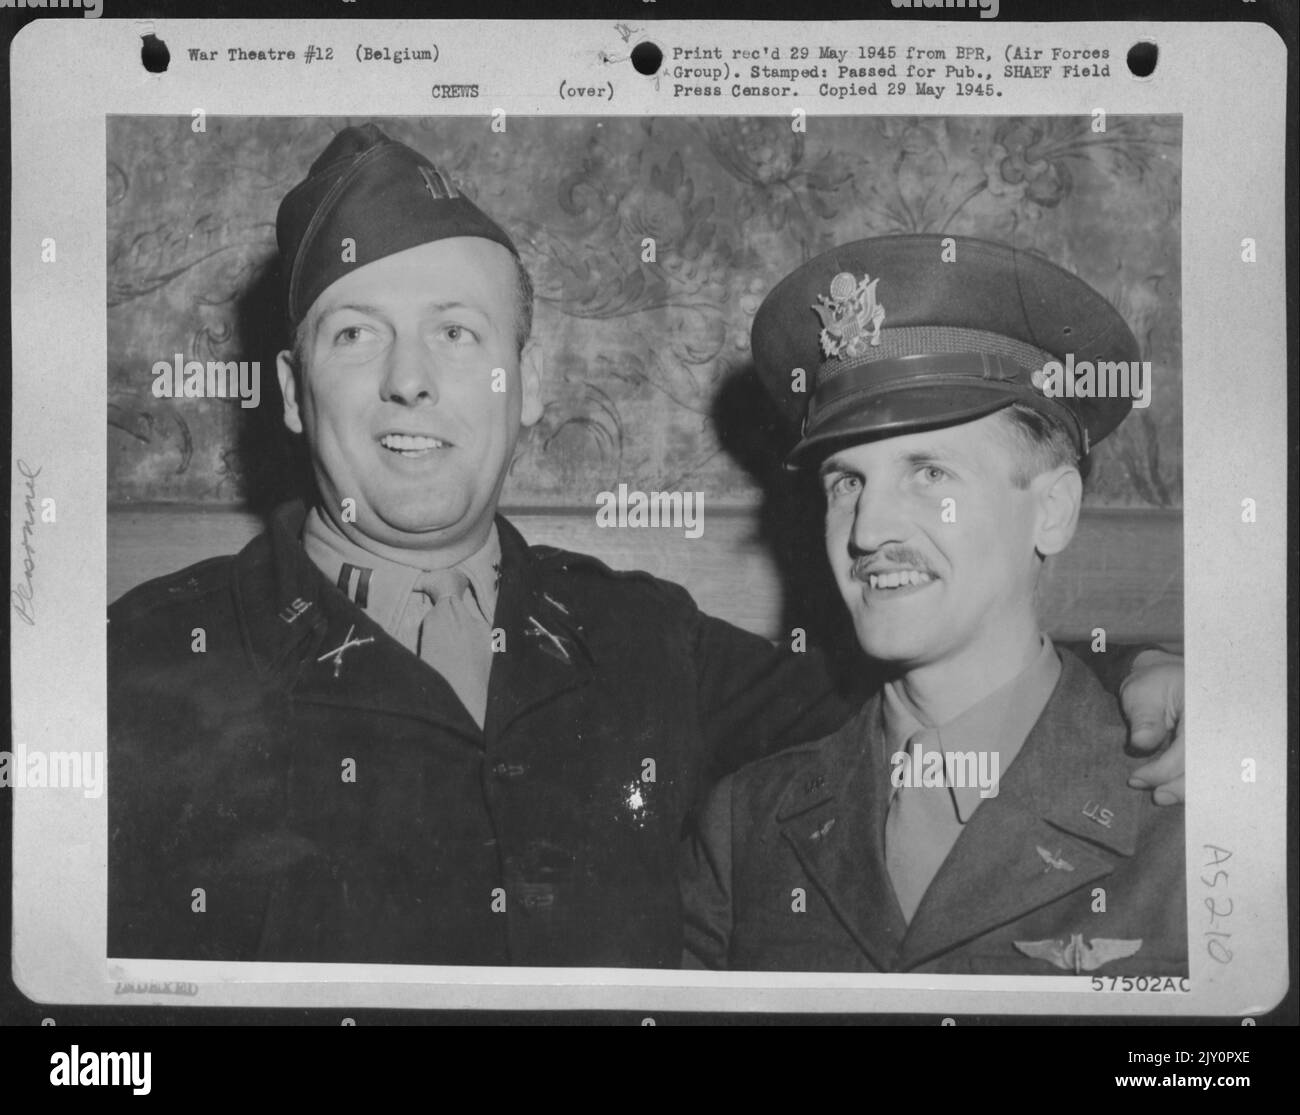 Belgium -- Capt. Thomas E. Mccracken (Left), Ground Liaison Officer At A Combat Wing Of The 9Th Bombardment Division, Who Liberated His Brother, 2Nd Lt. James B. Mccraken (Right), A 'Flying Fortress' Bombardier, Who Was Interned By The Nazis For More Than Stock Photo